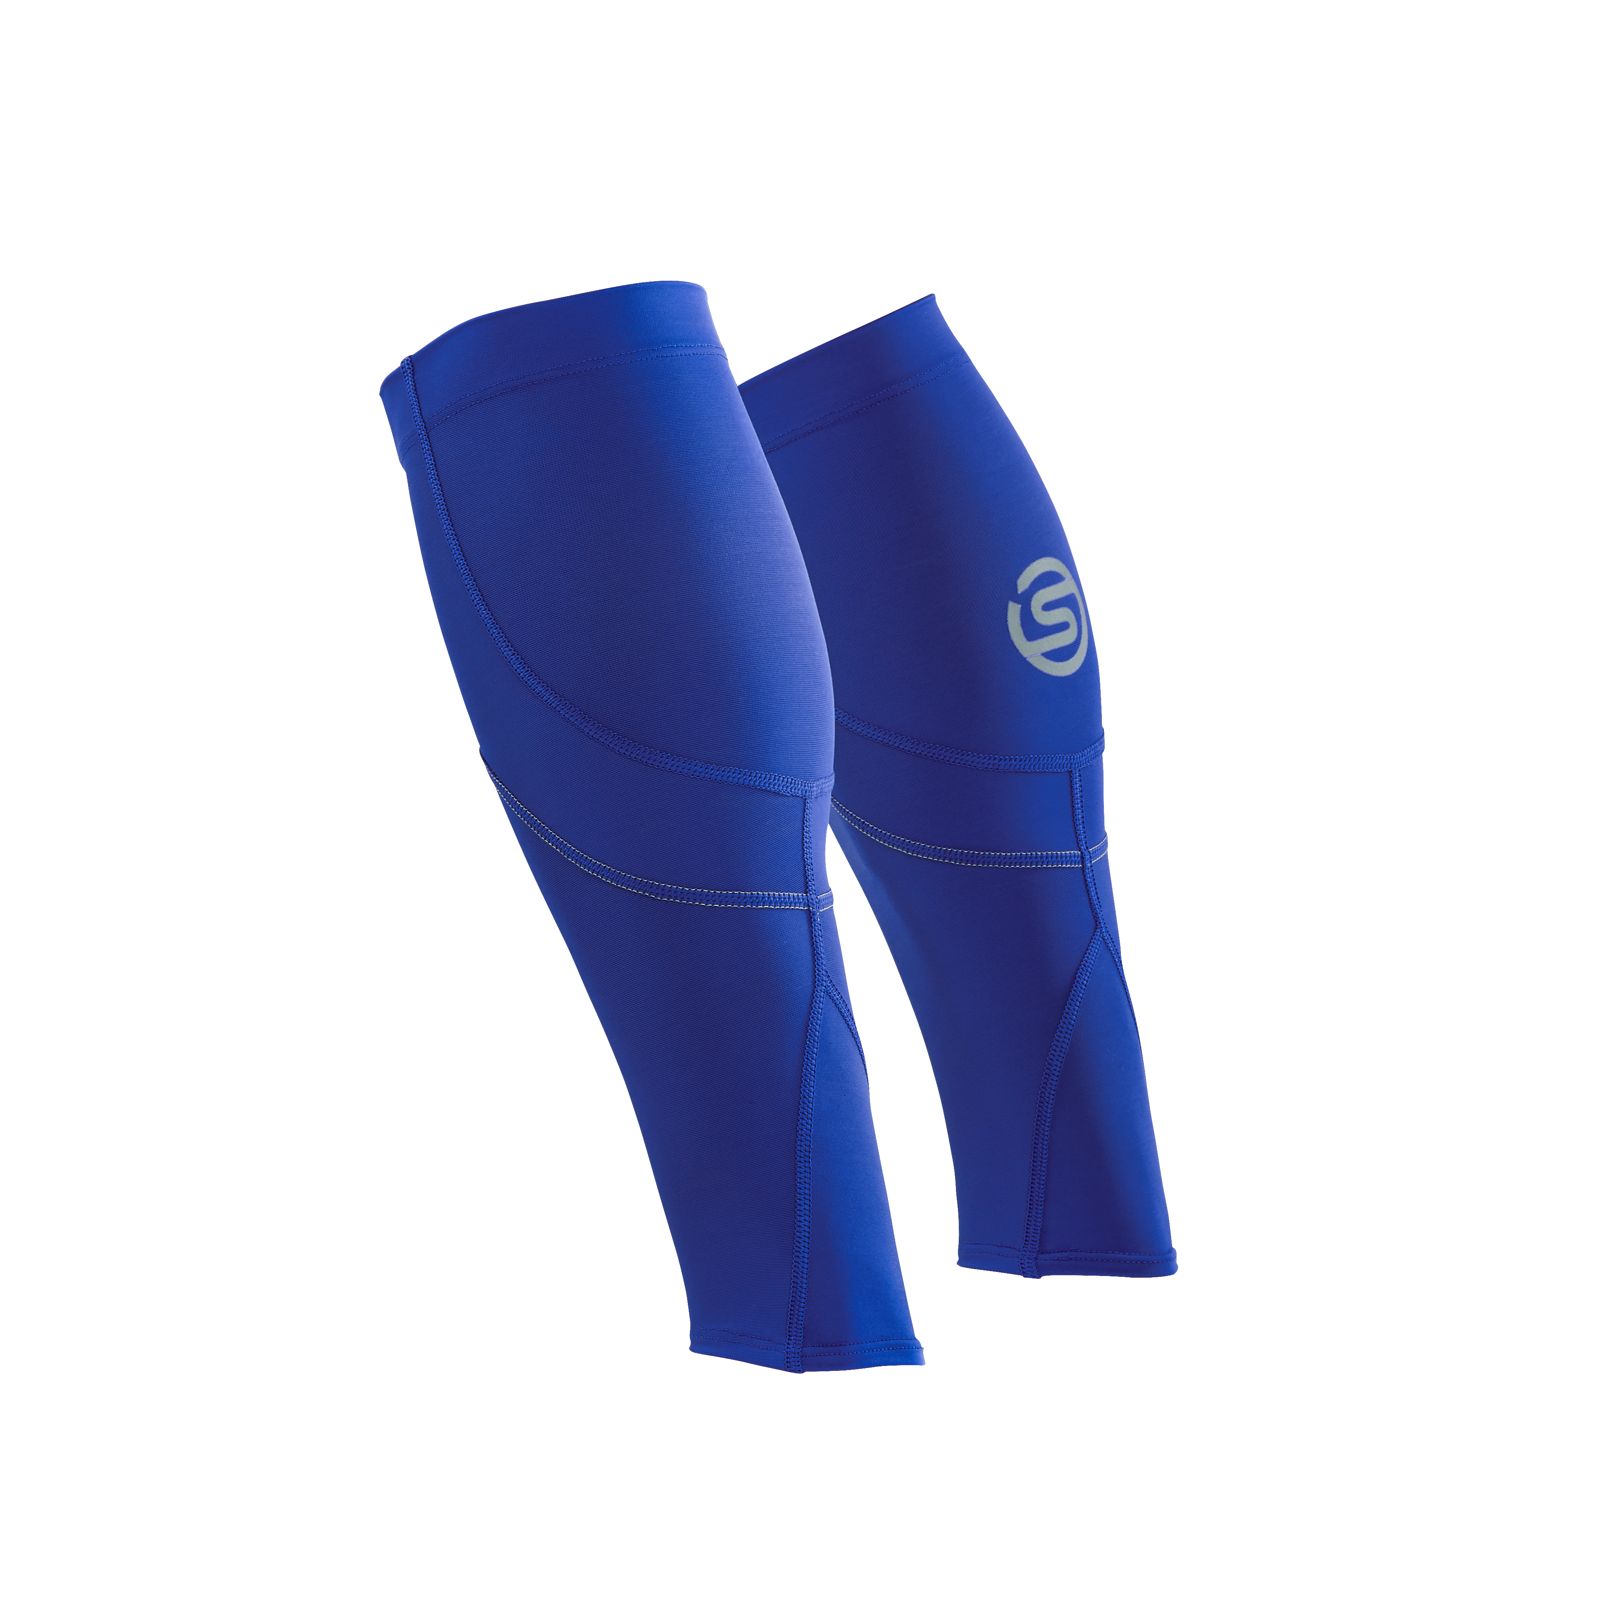 skins compression Series-3 Unisex Recovery MX Calf Sleeves